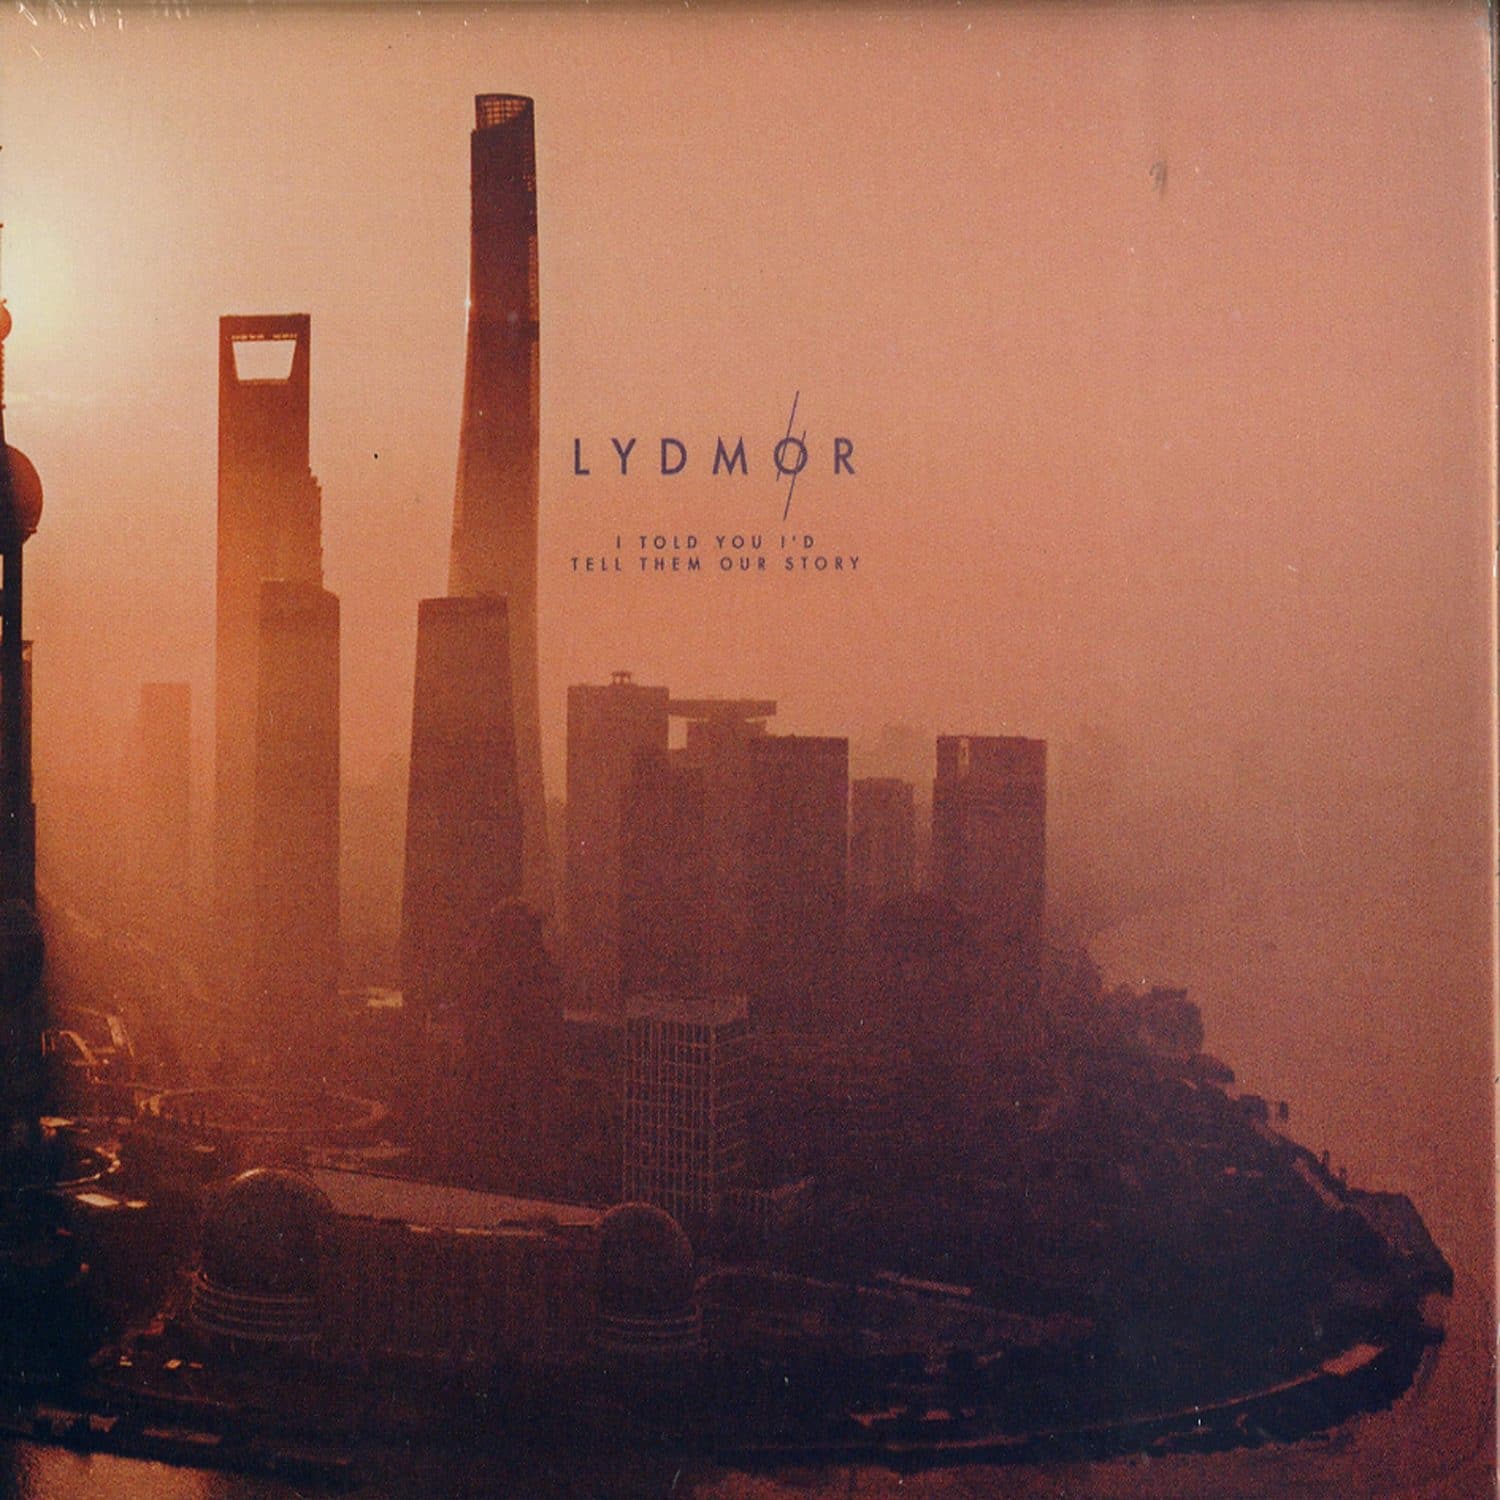 Lydmor - I TOLD YOUID TELL THEM OUR STORY 